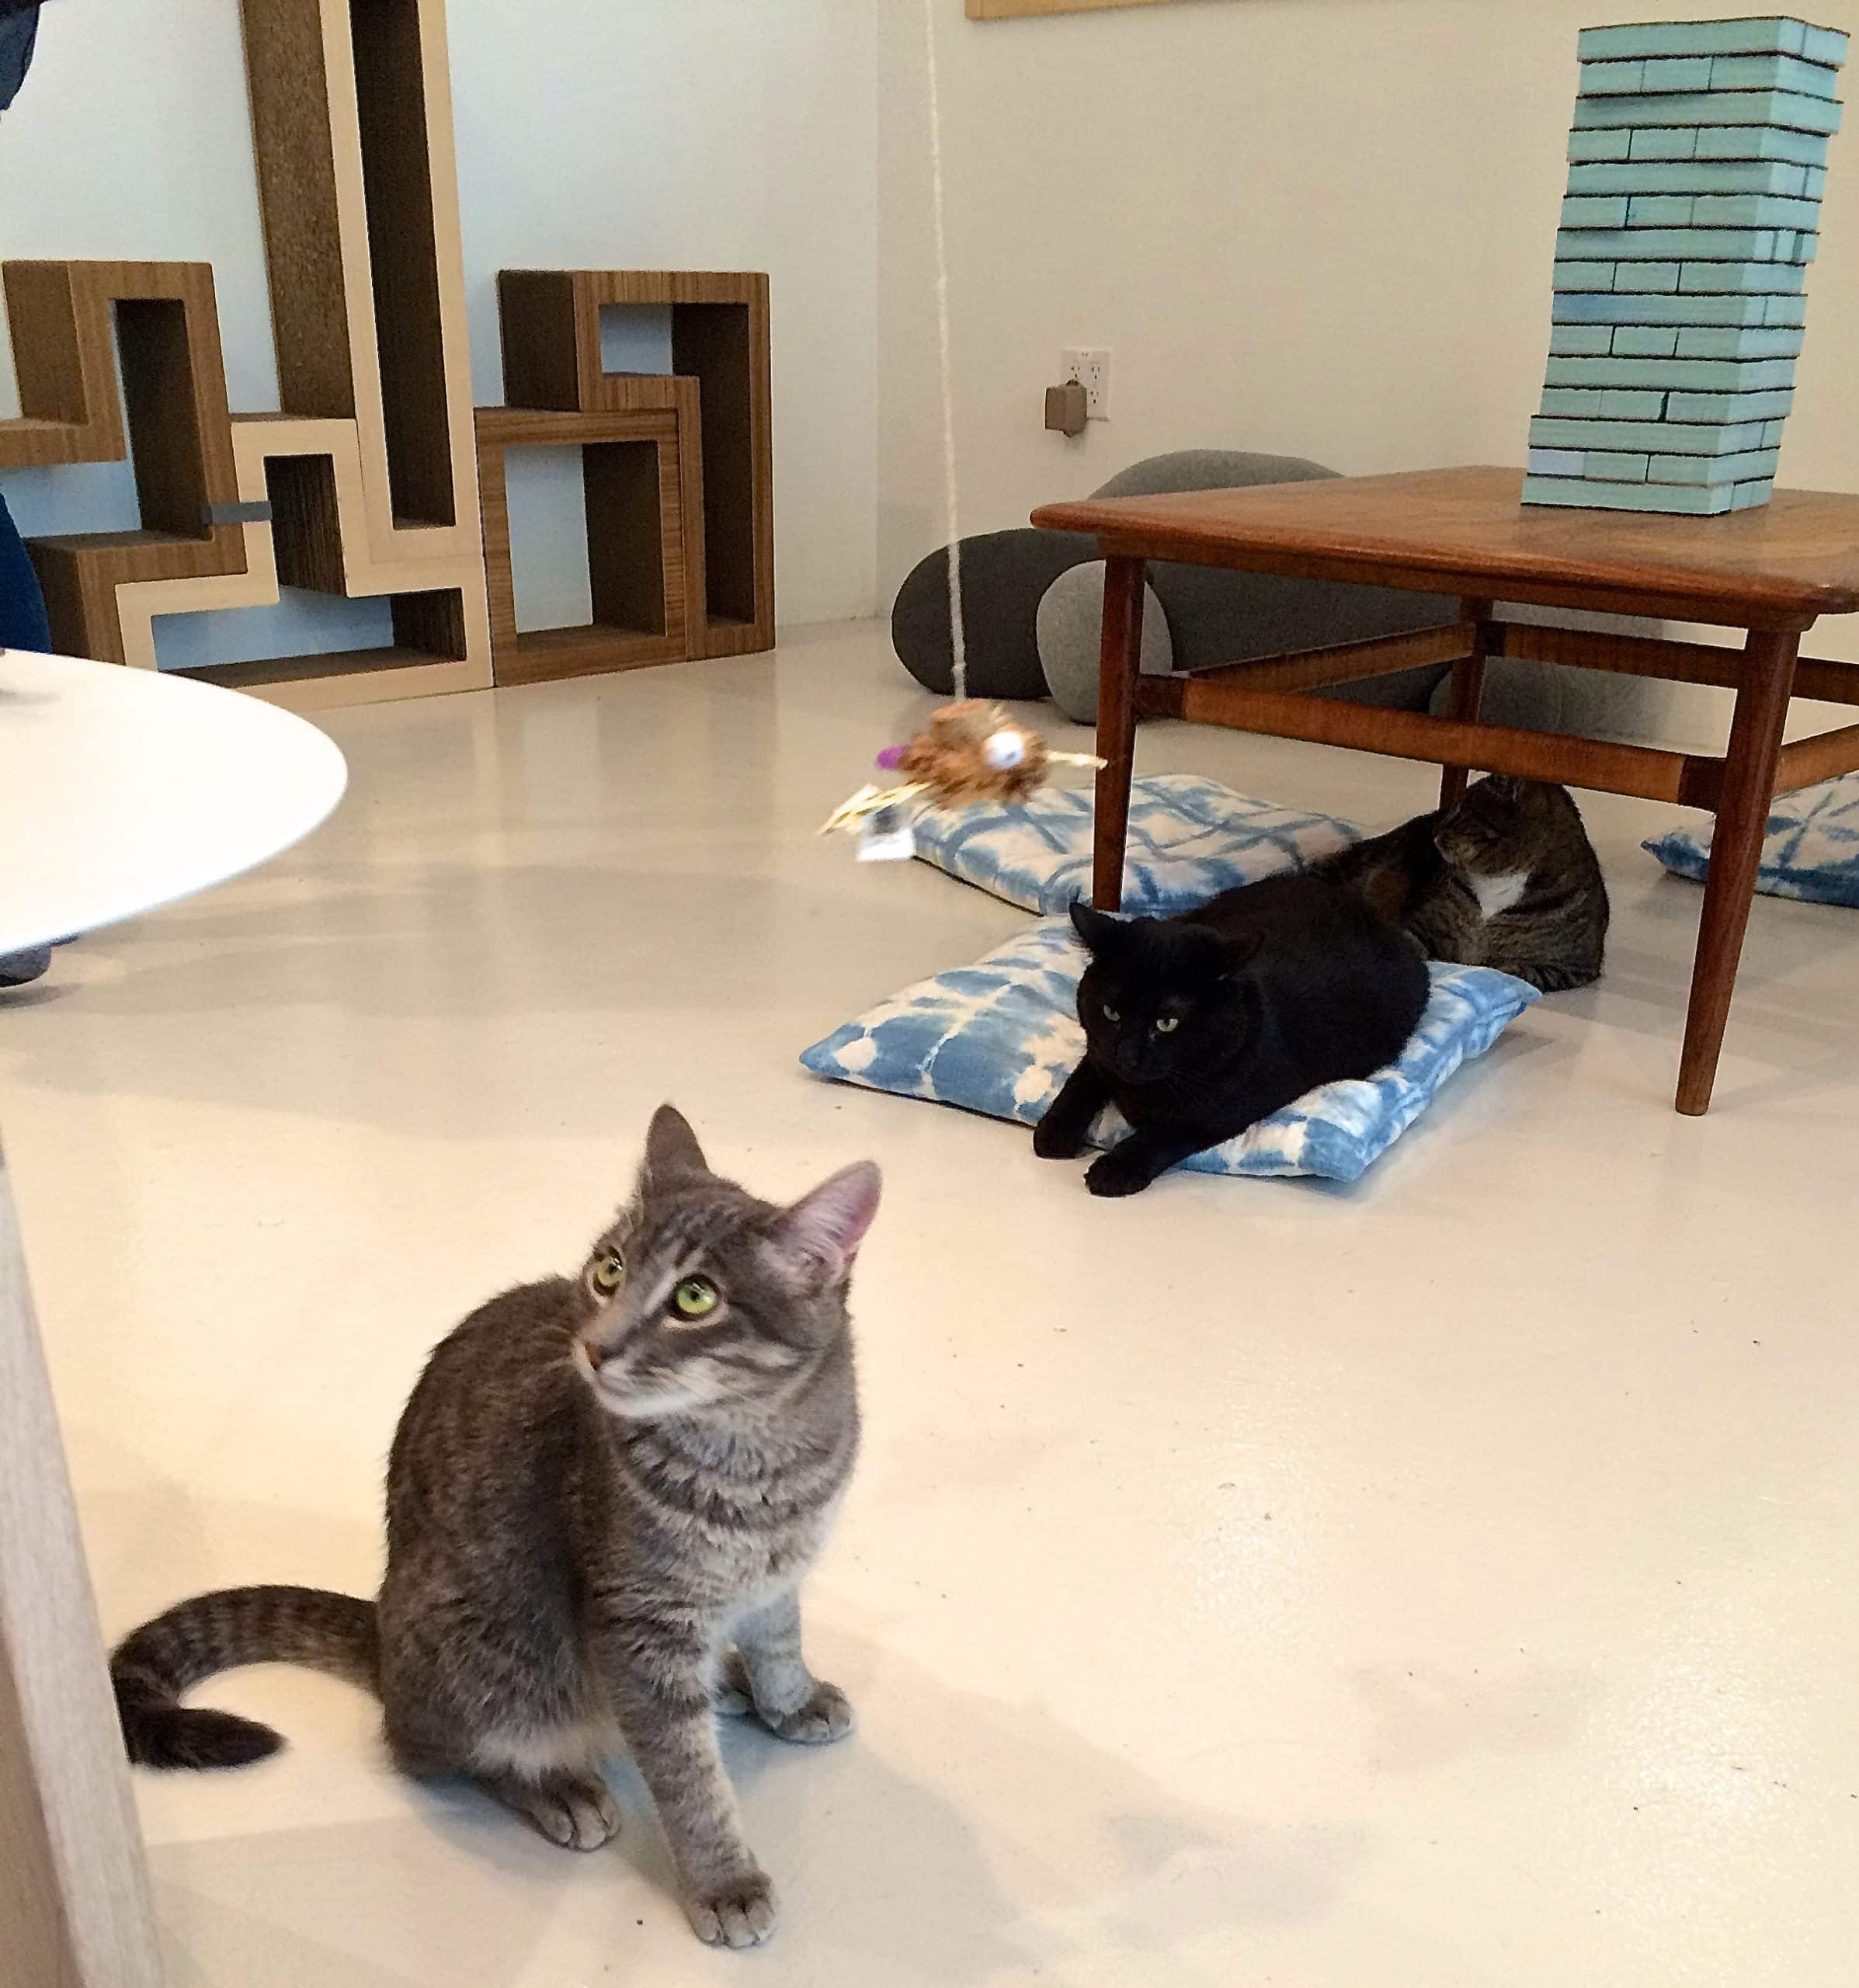 KitTea Cat Cafe Review: A Look Inside San Francisco